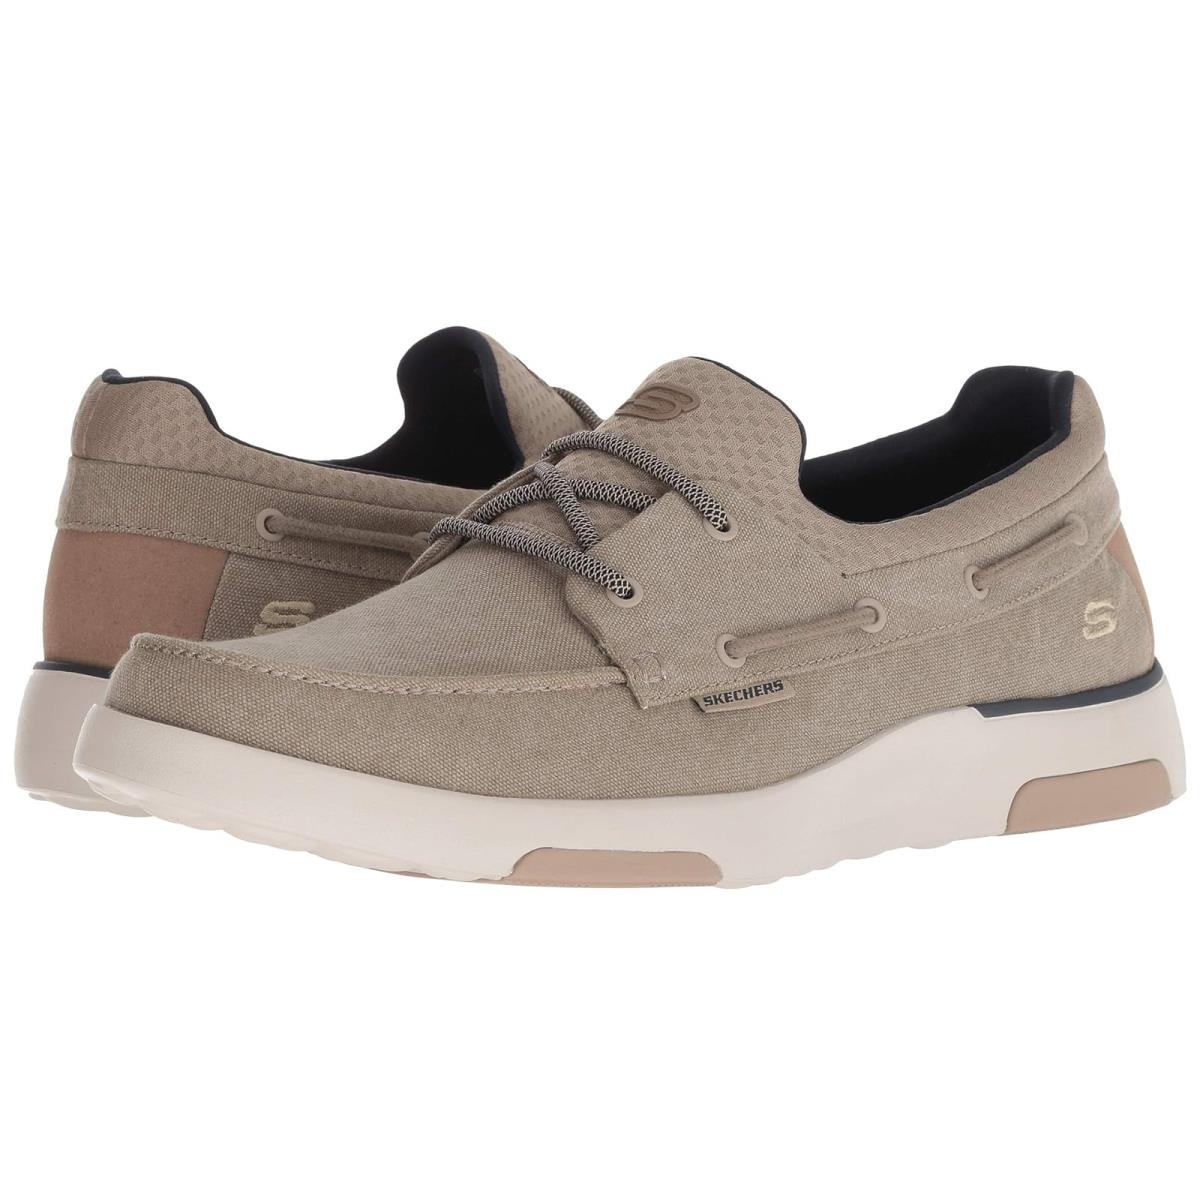 Man`s Sneakers Athletic Shoes Skechers Bellinger - Garmo Taupe